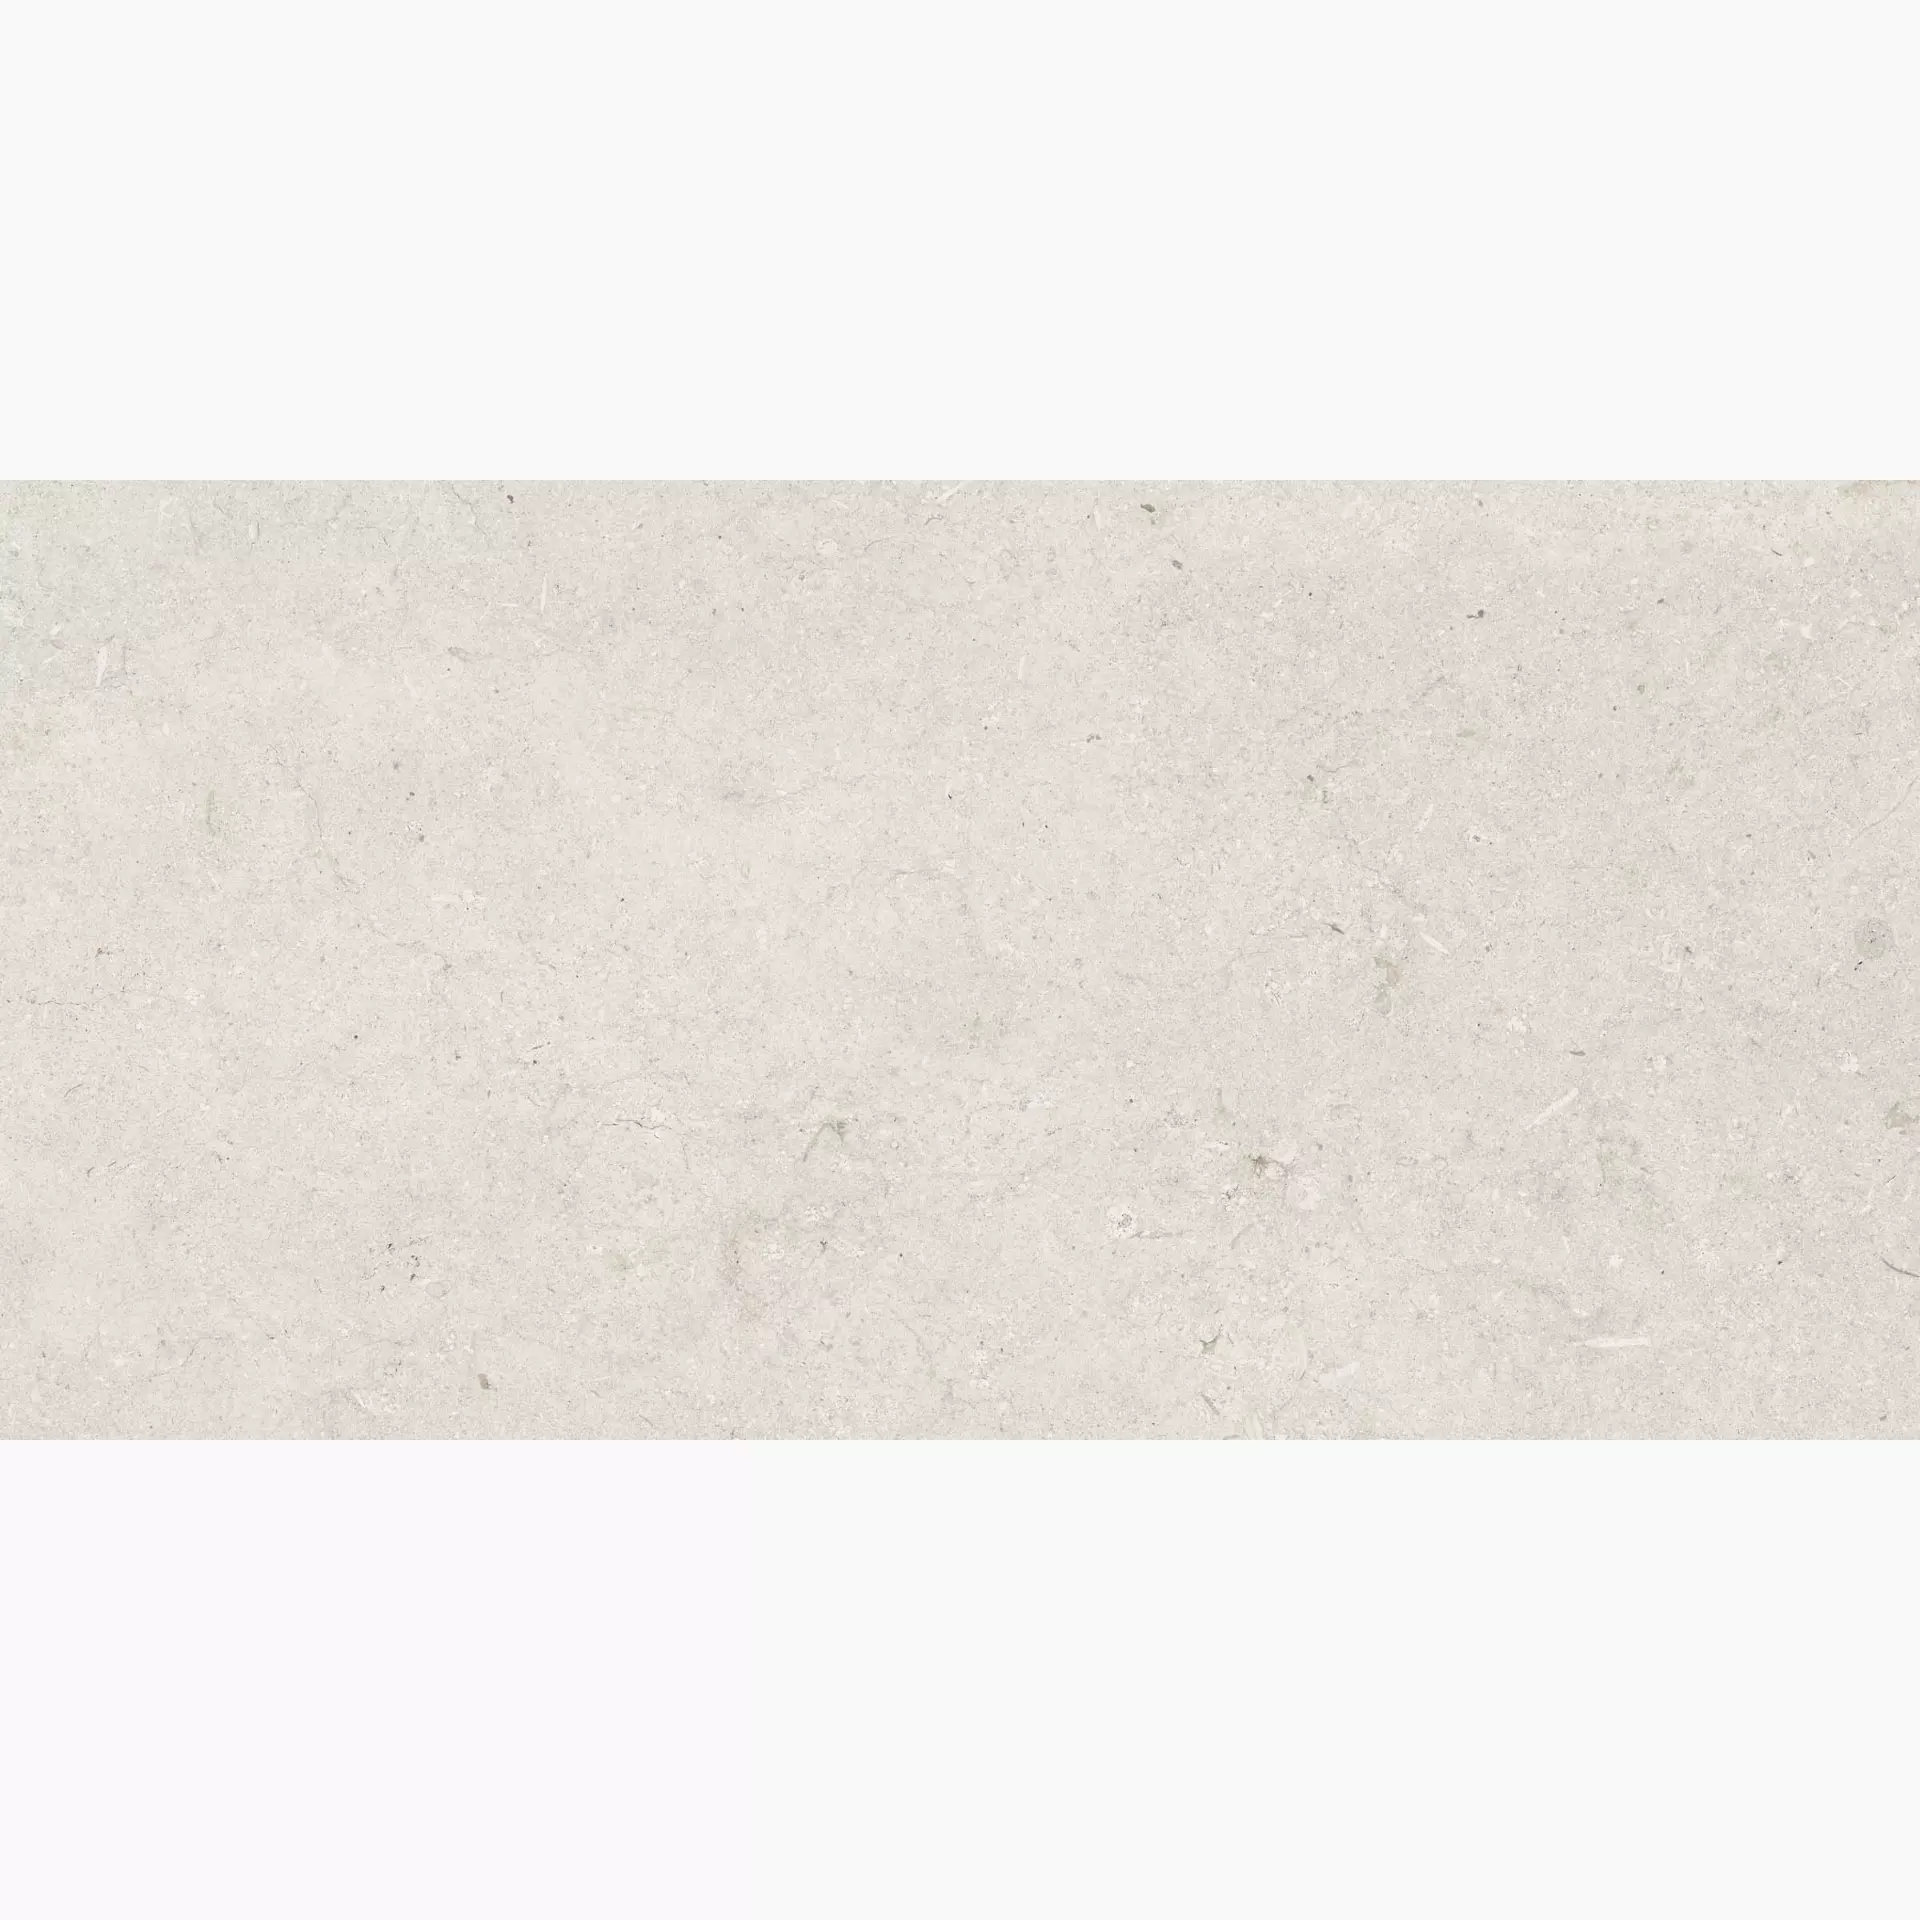 ABK Poetry Stone Trani Ivory Naturale PF60010539 60x120cm rectified 8,5mm